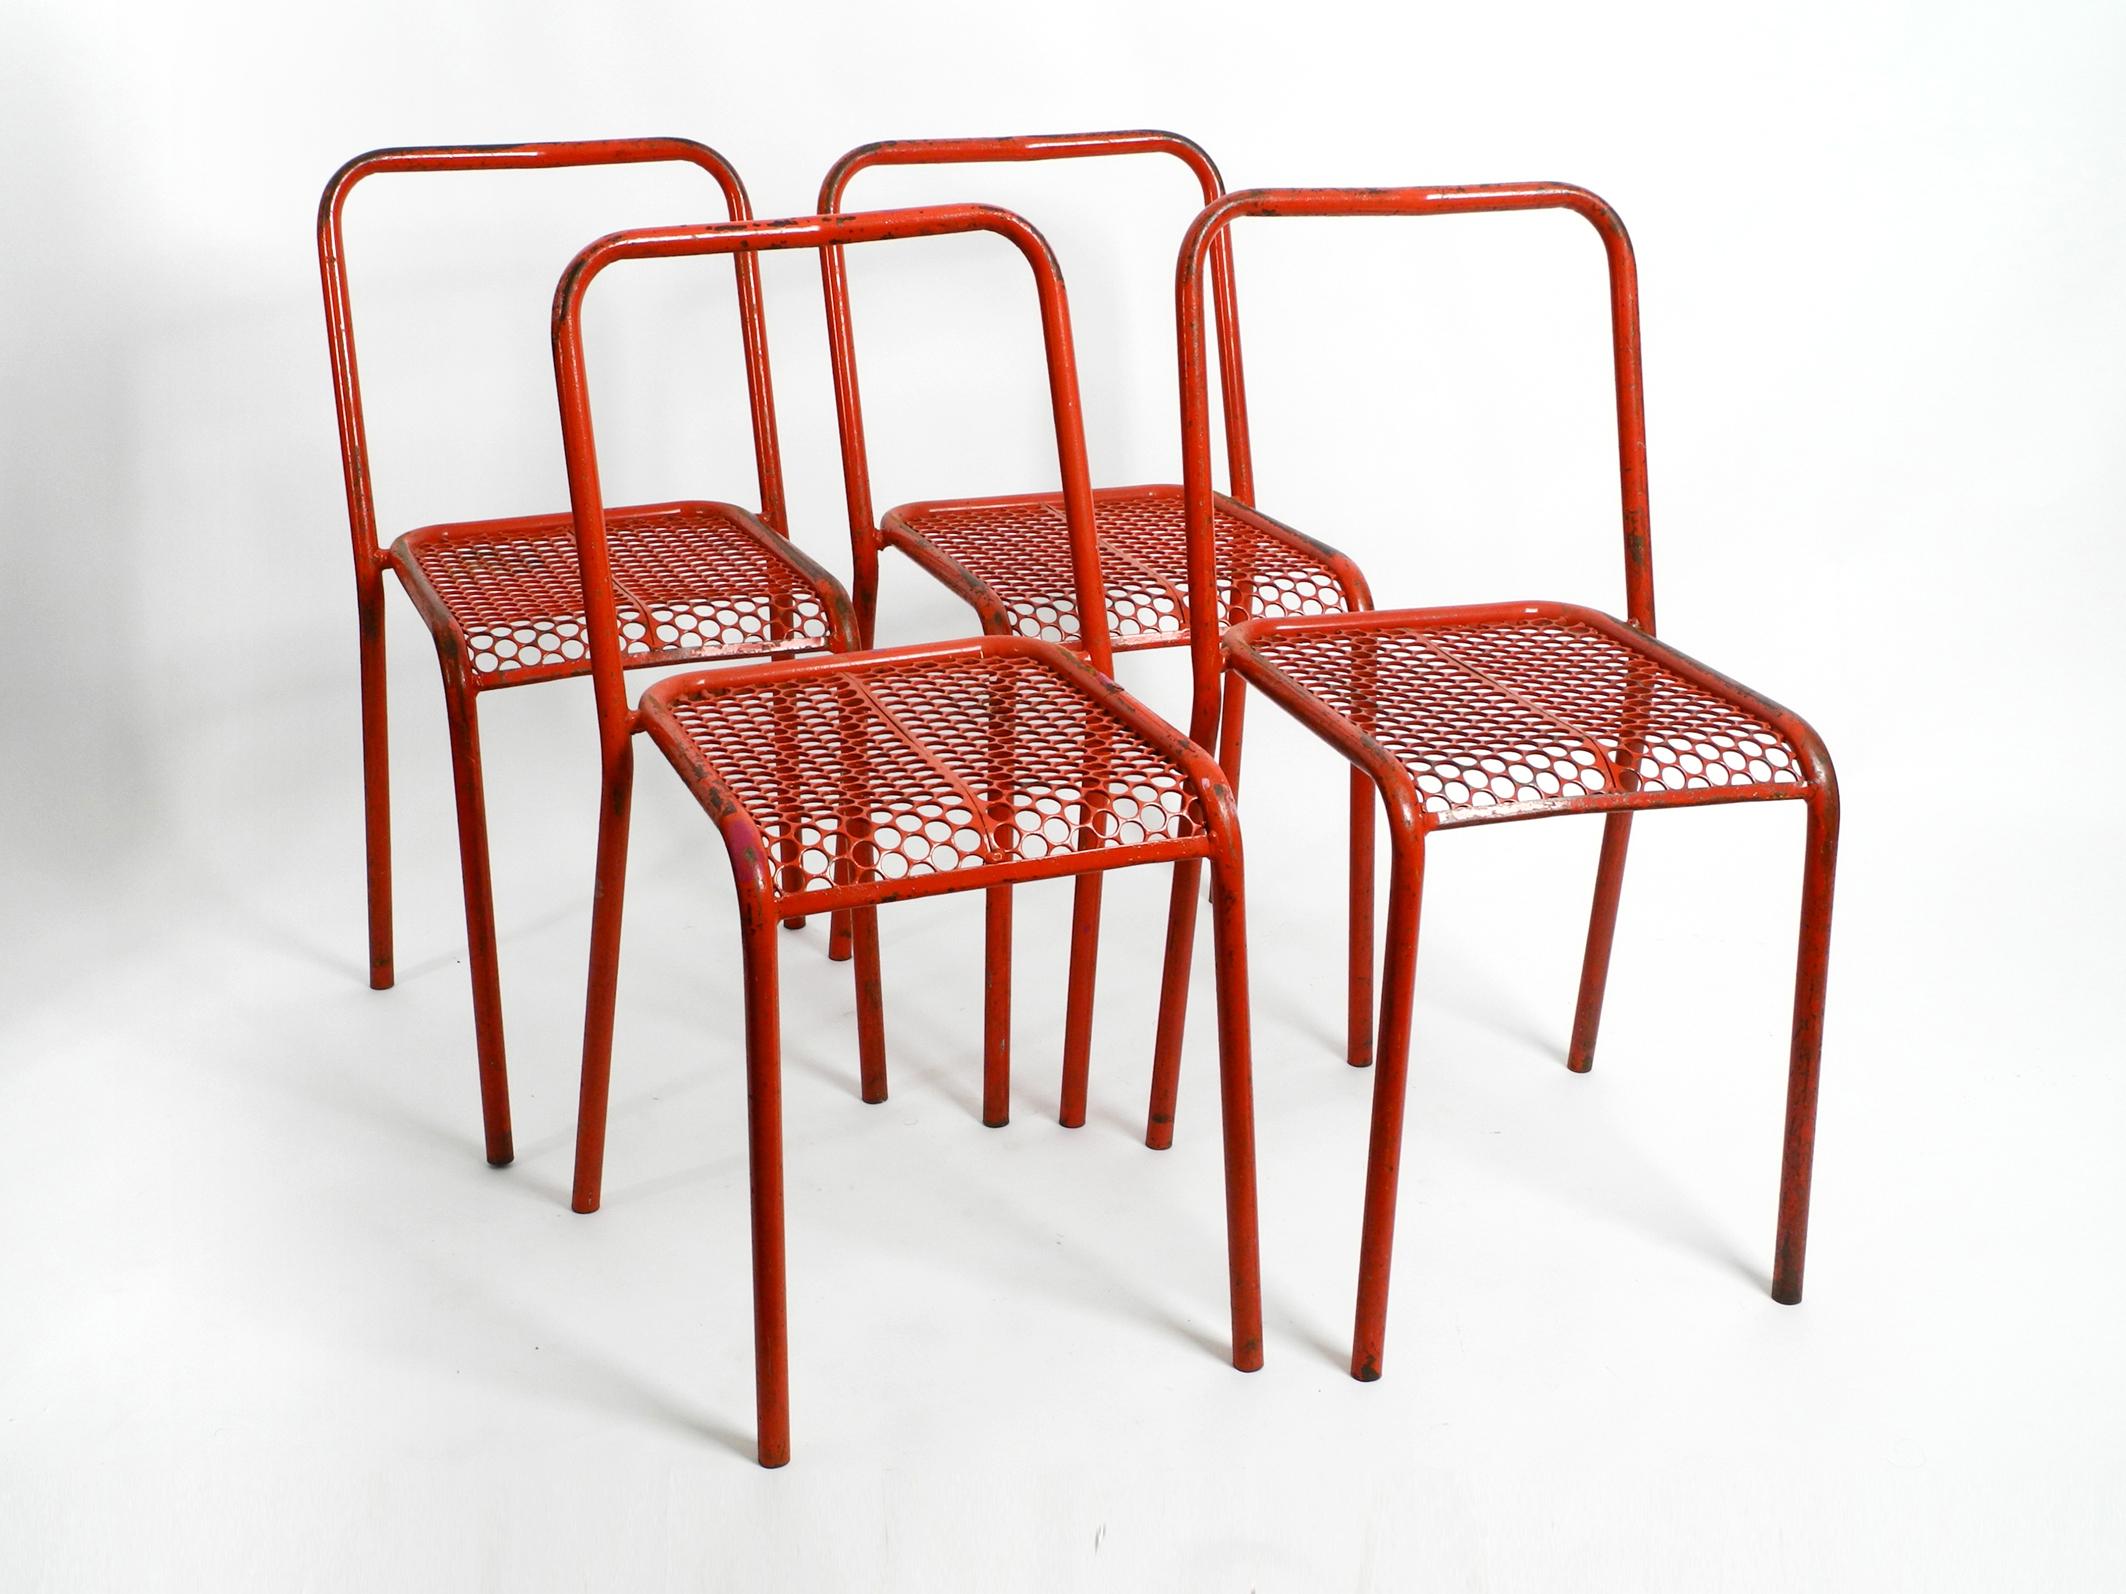 French Four 1940s Industrial Metal Chairs by Réne Malaval in Their Original Red Color